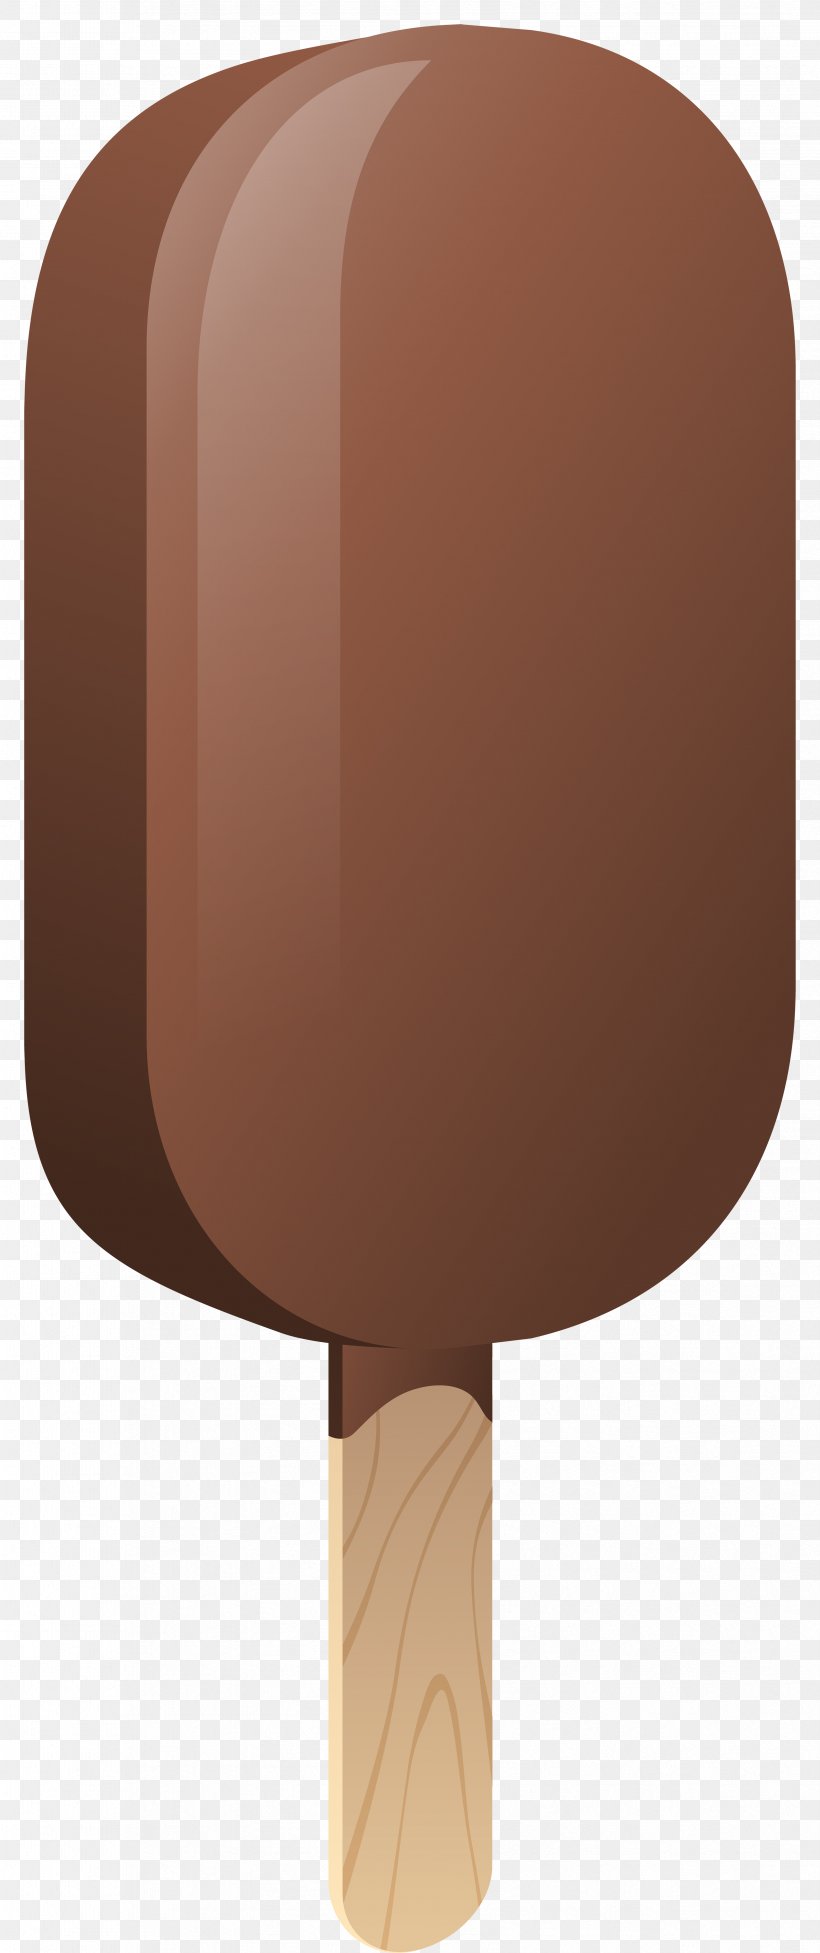 Ice Cream Clip Art, PNG, 3358x8000px, Ice Cream, Brown, Cloud, Computer Network, Cream Download Free